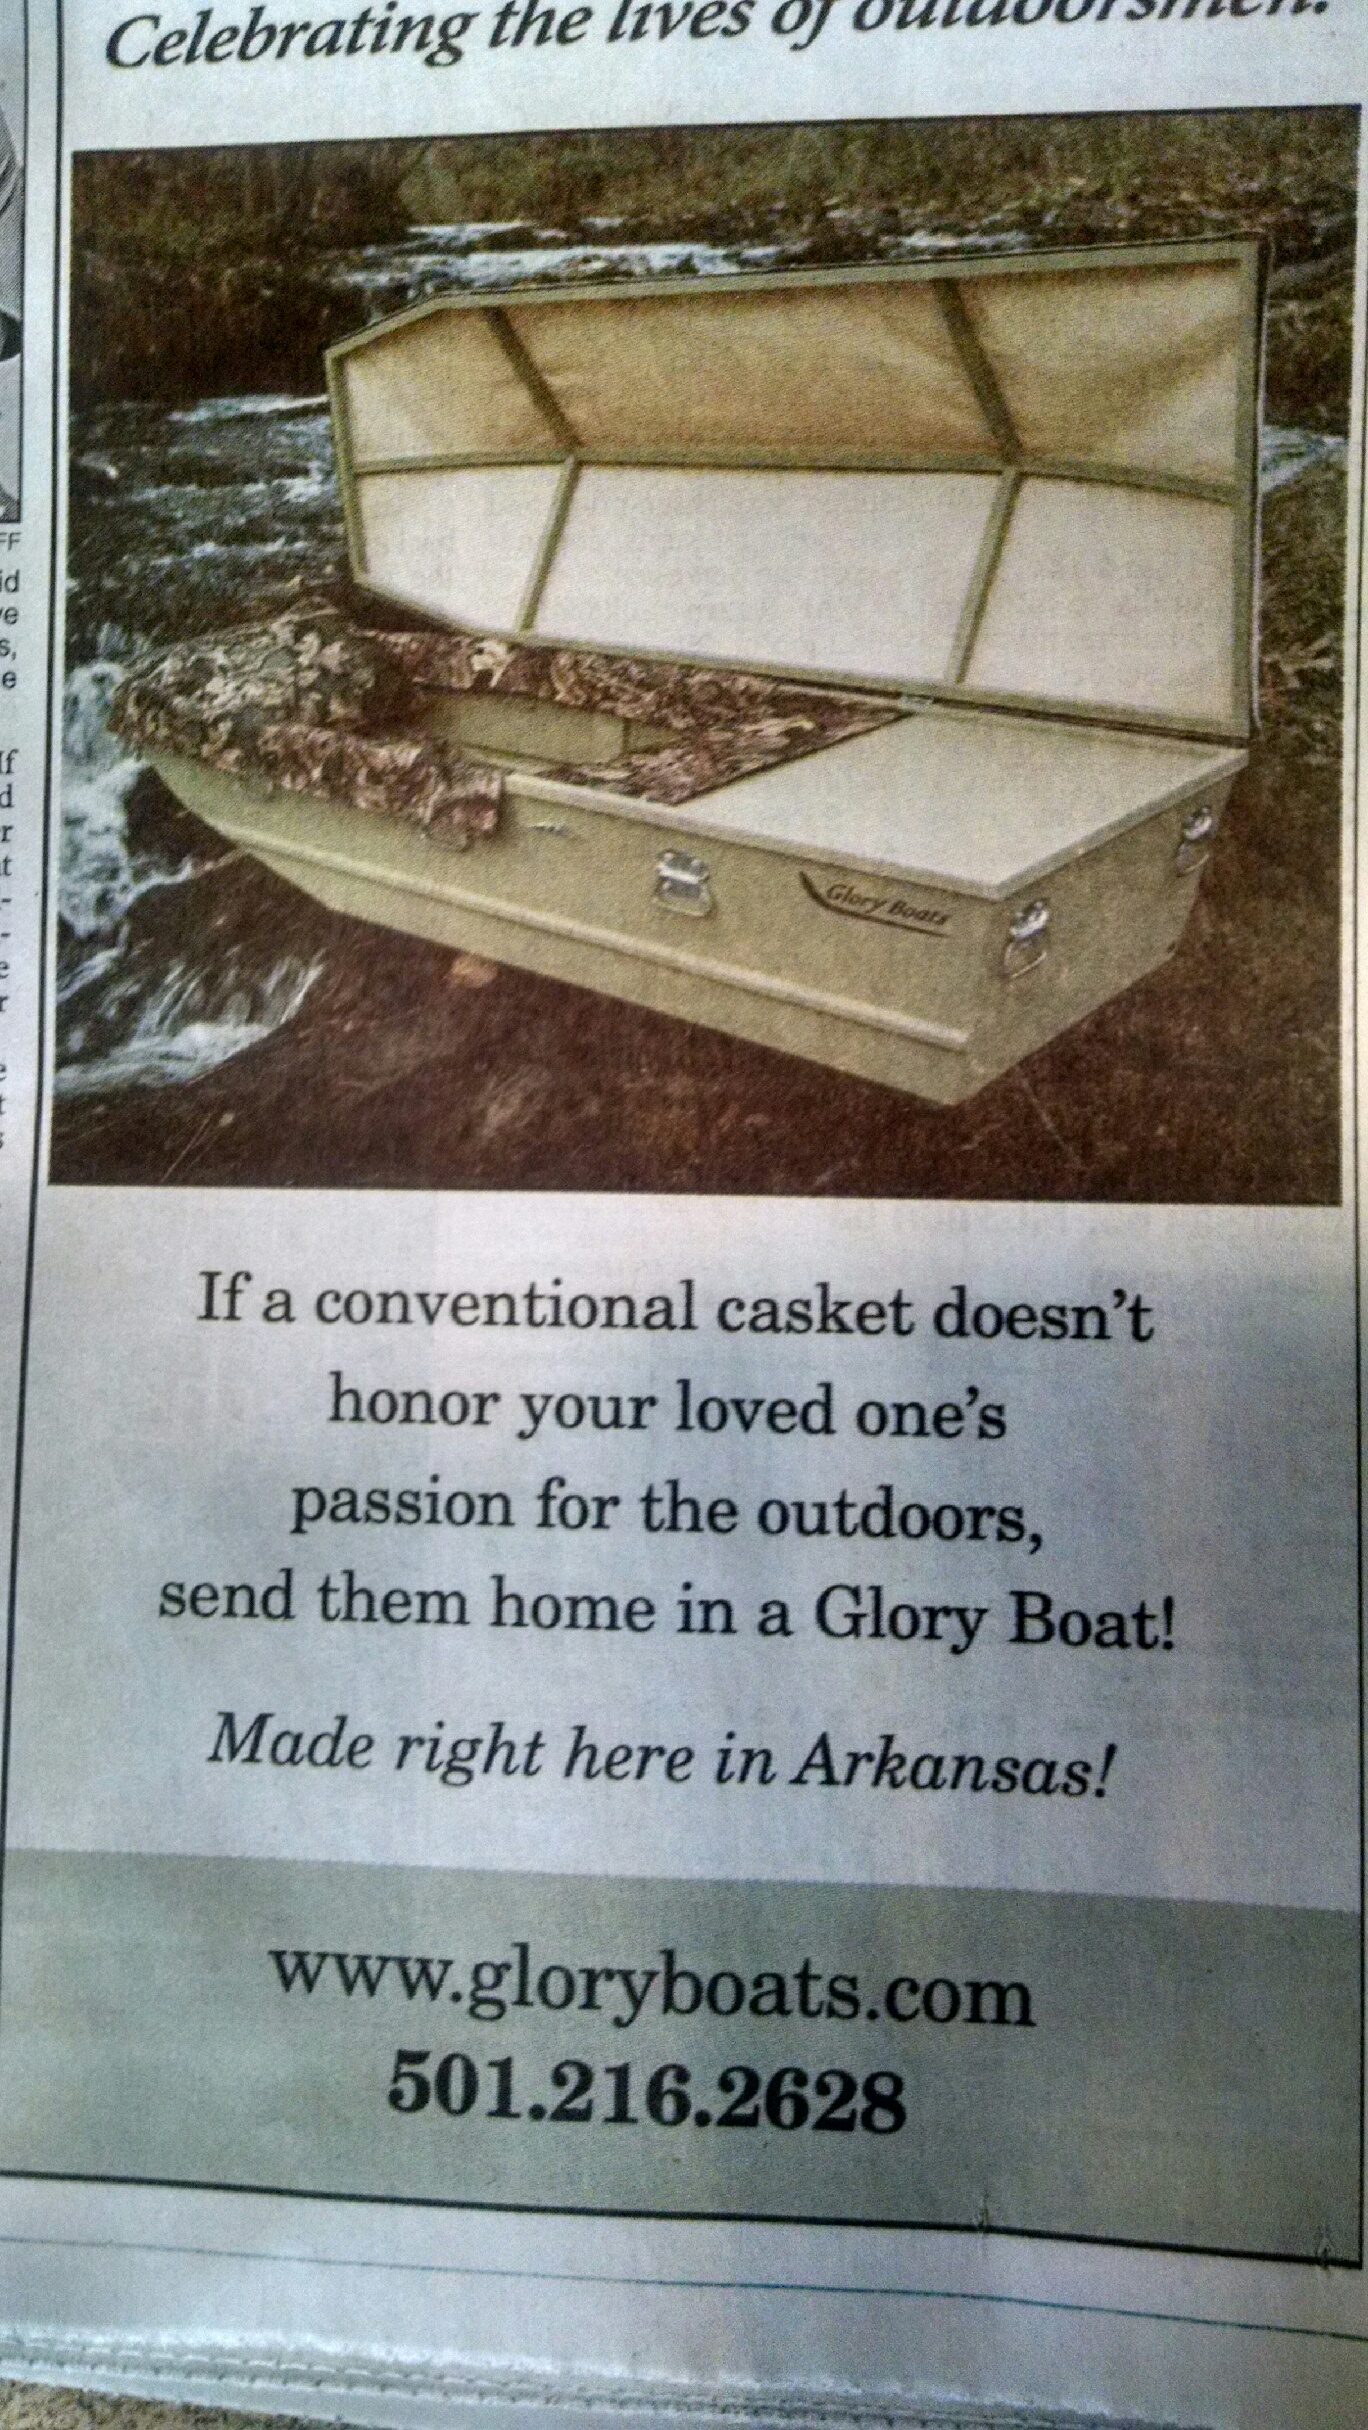 This ad appeared in the Sunday edition of the Arkansas Democrat-Gazette